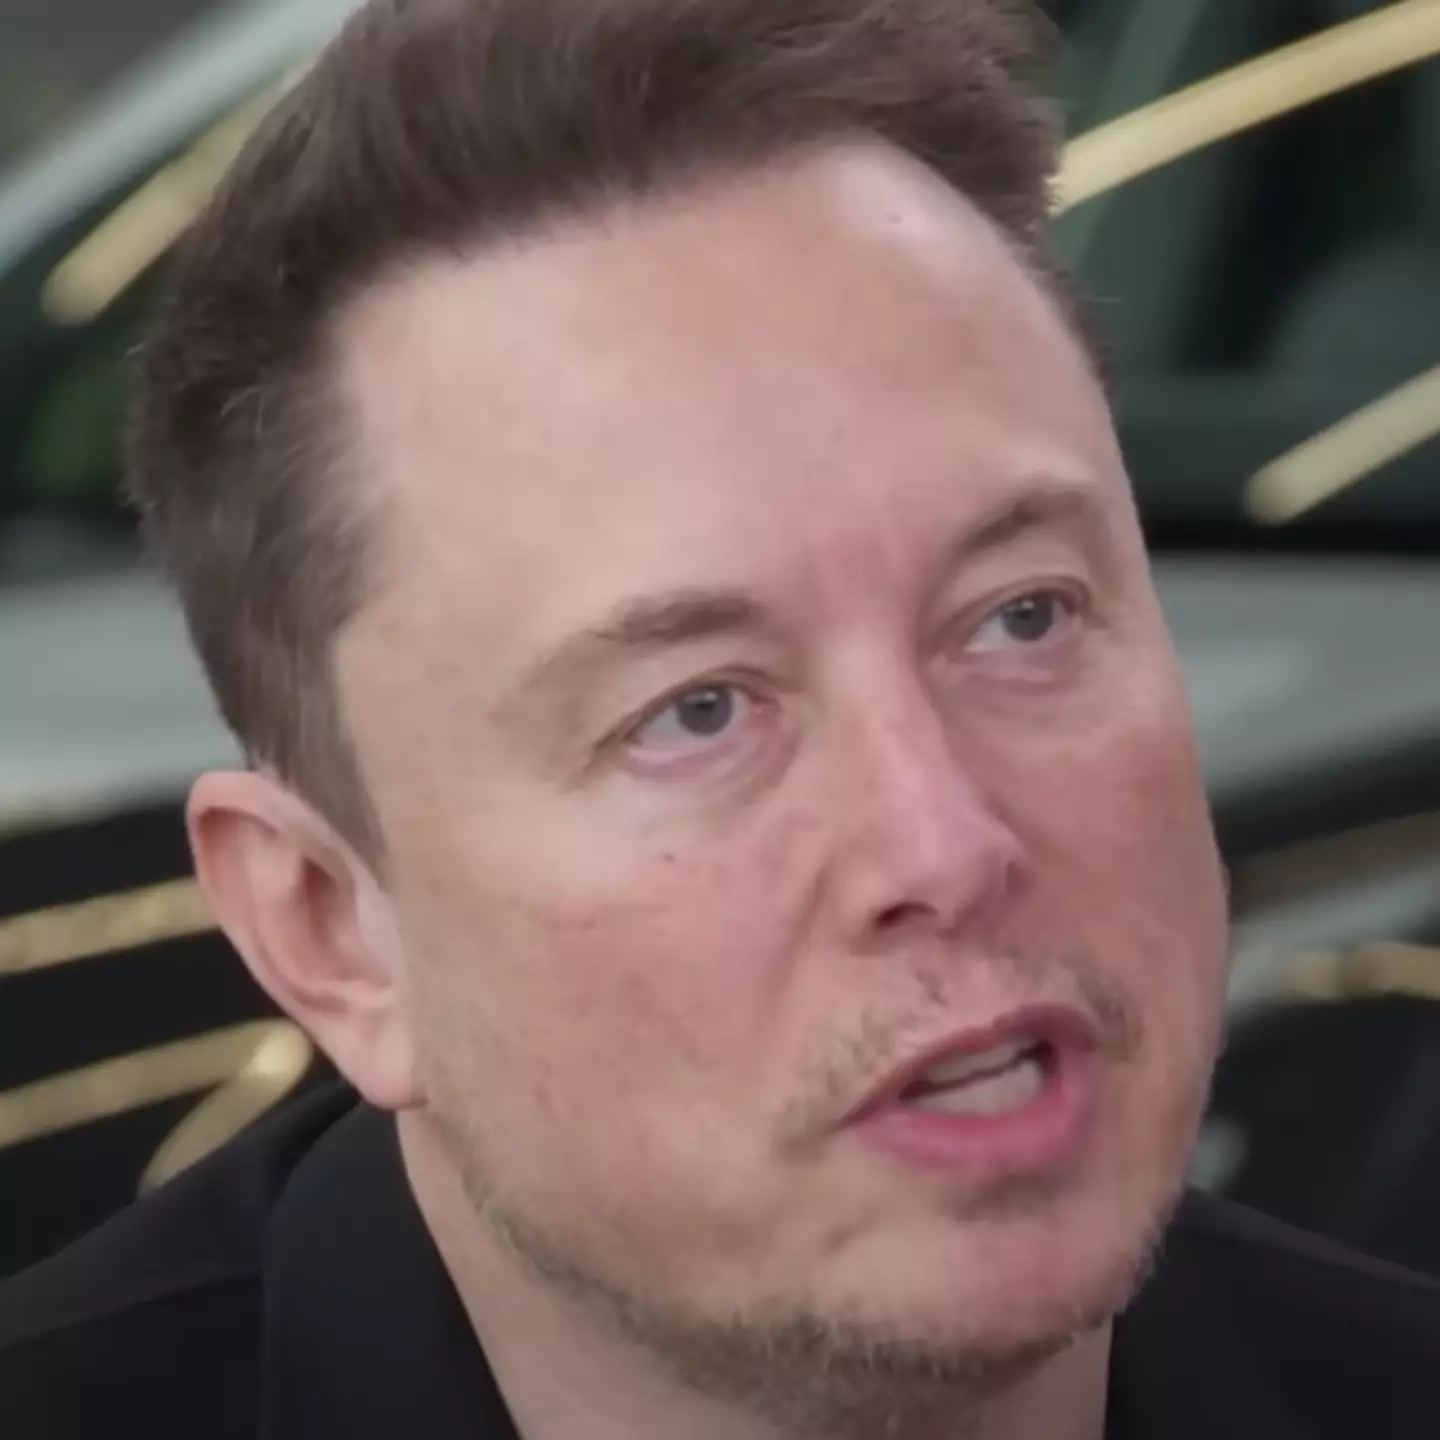 Elon Musk defends taking ketamine following 'inappropriate' question in interview with Don Lemon